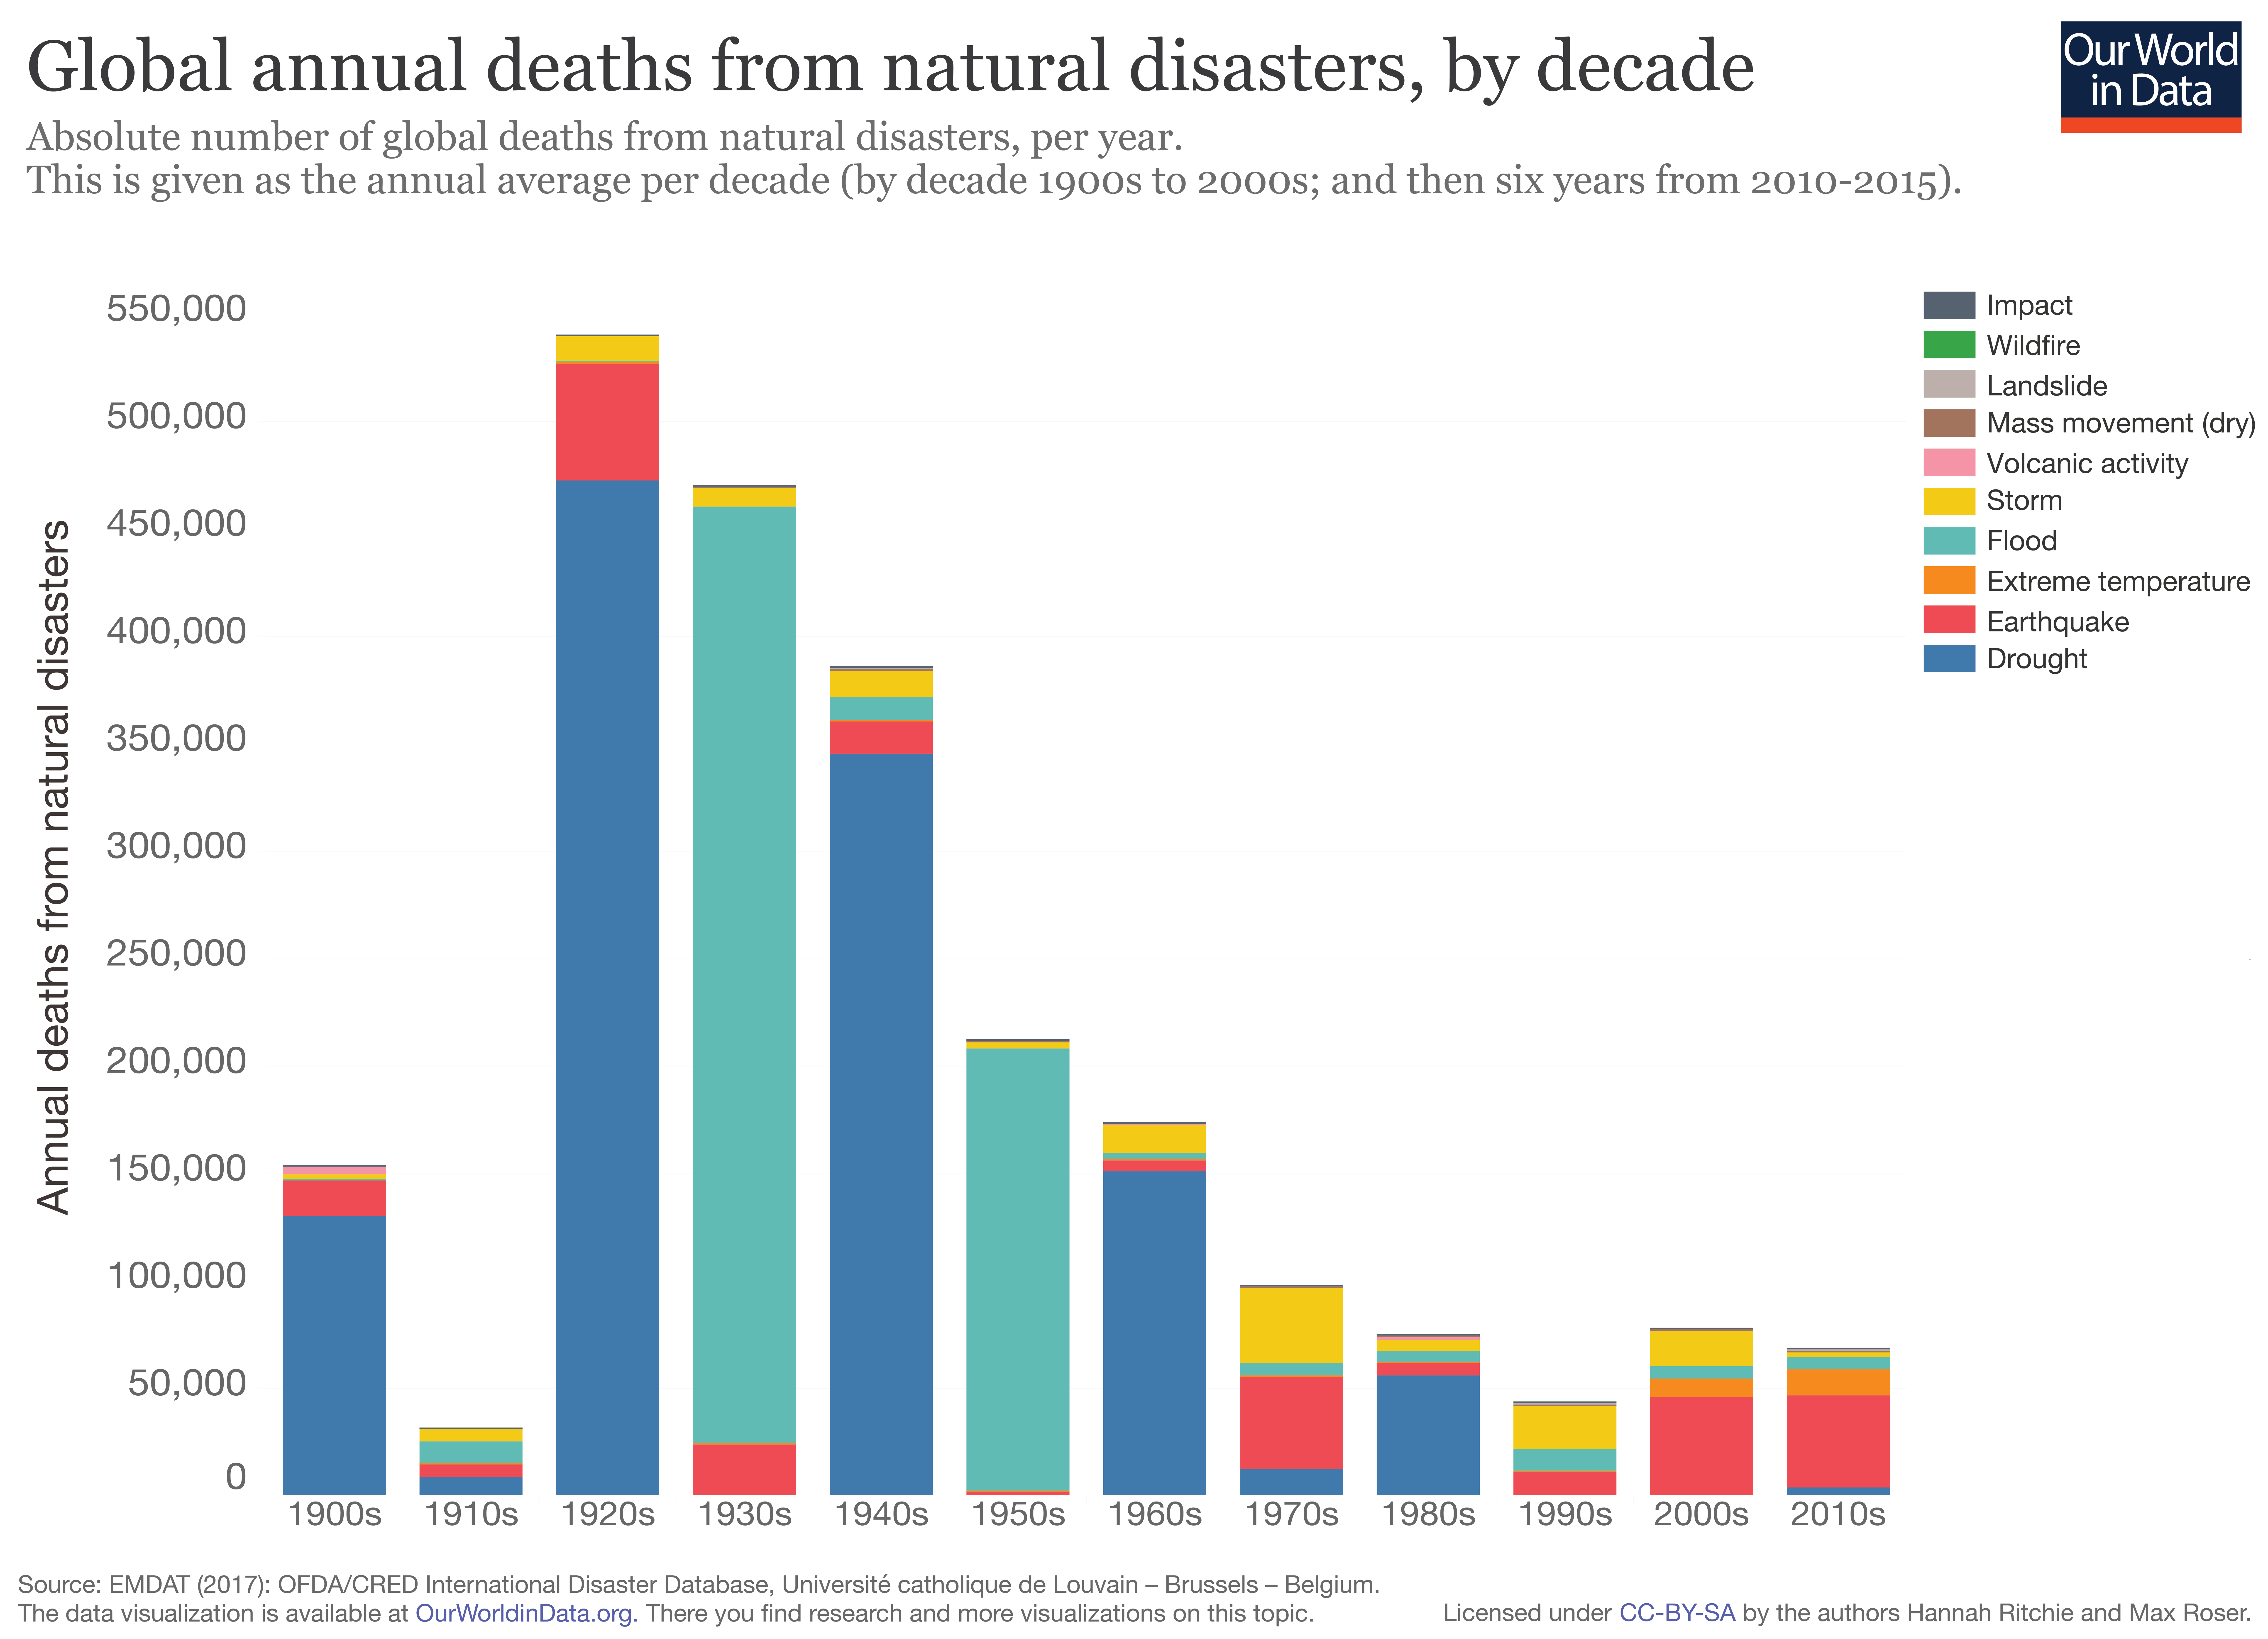 Global annual absolute deaths from natural disasters 01